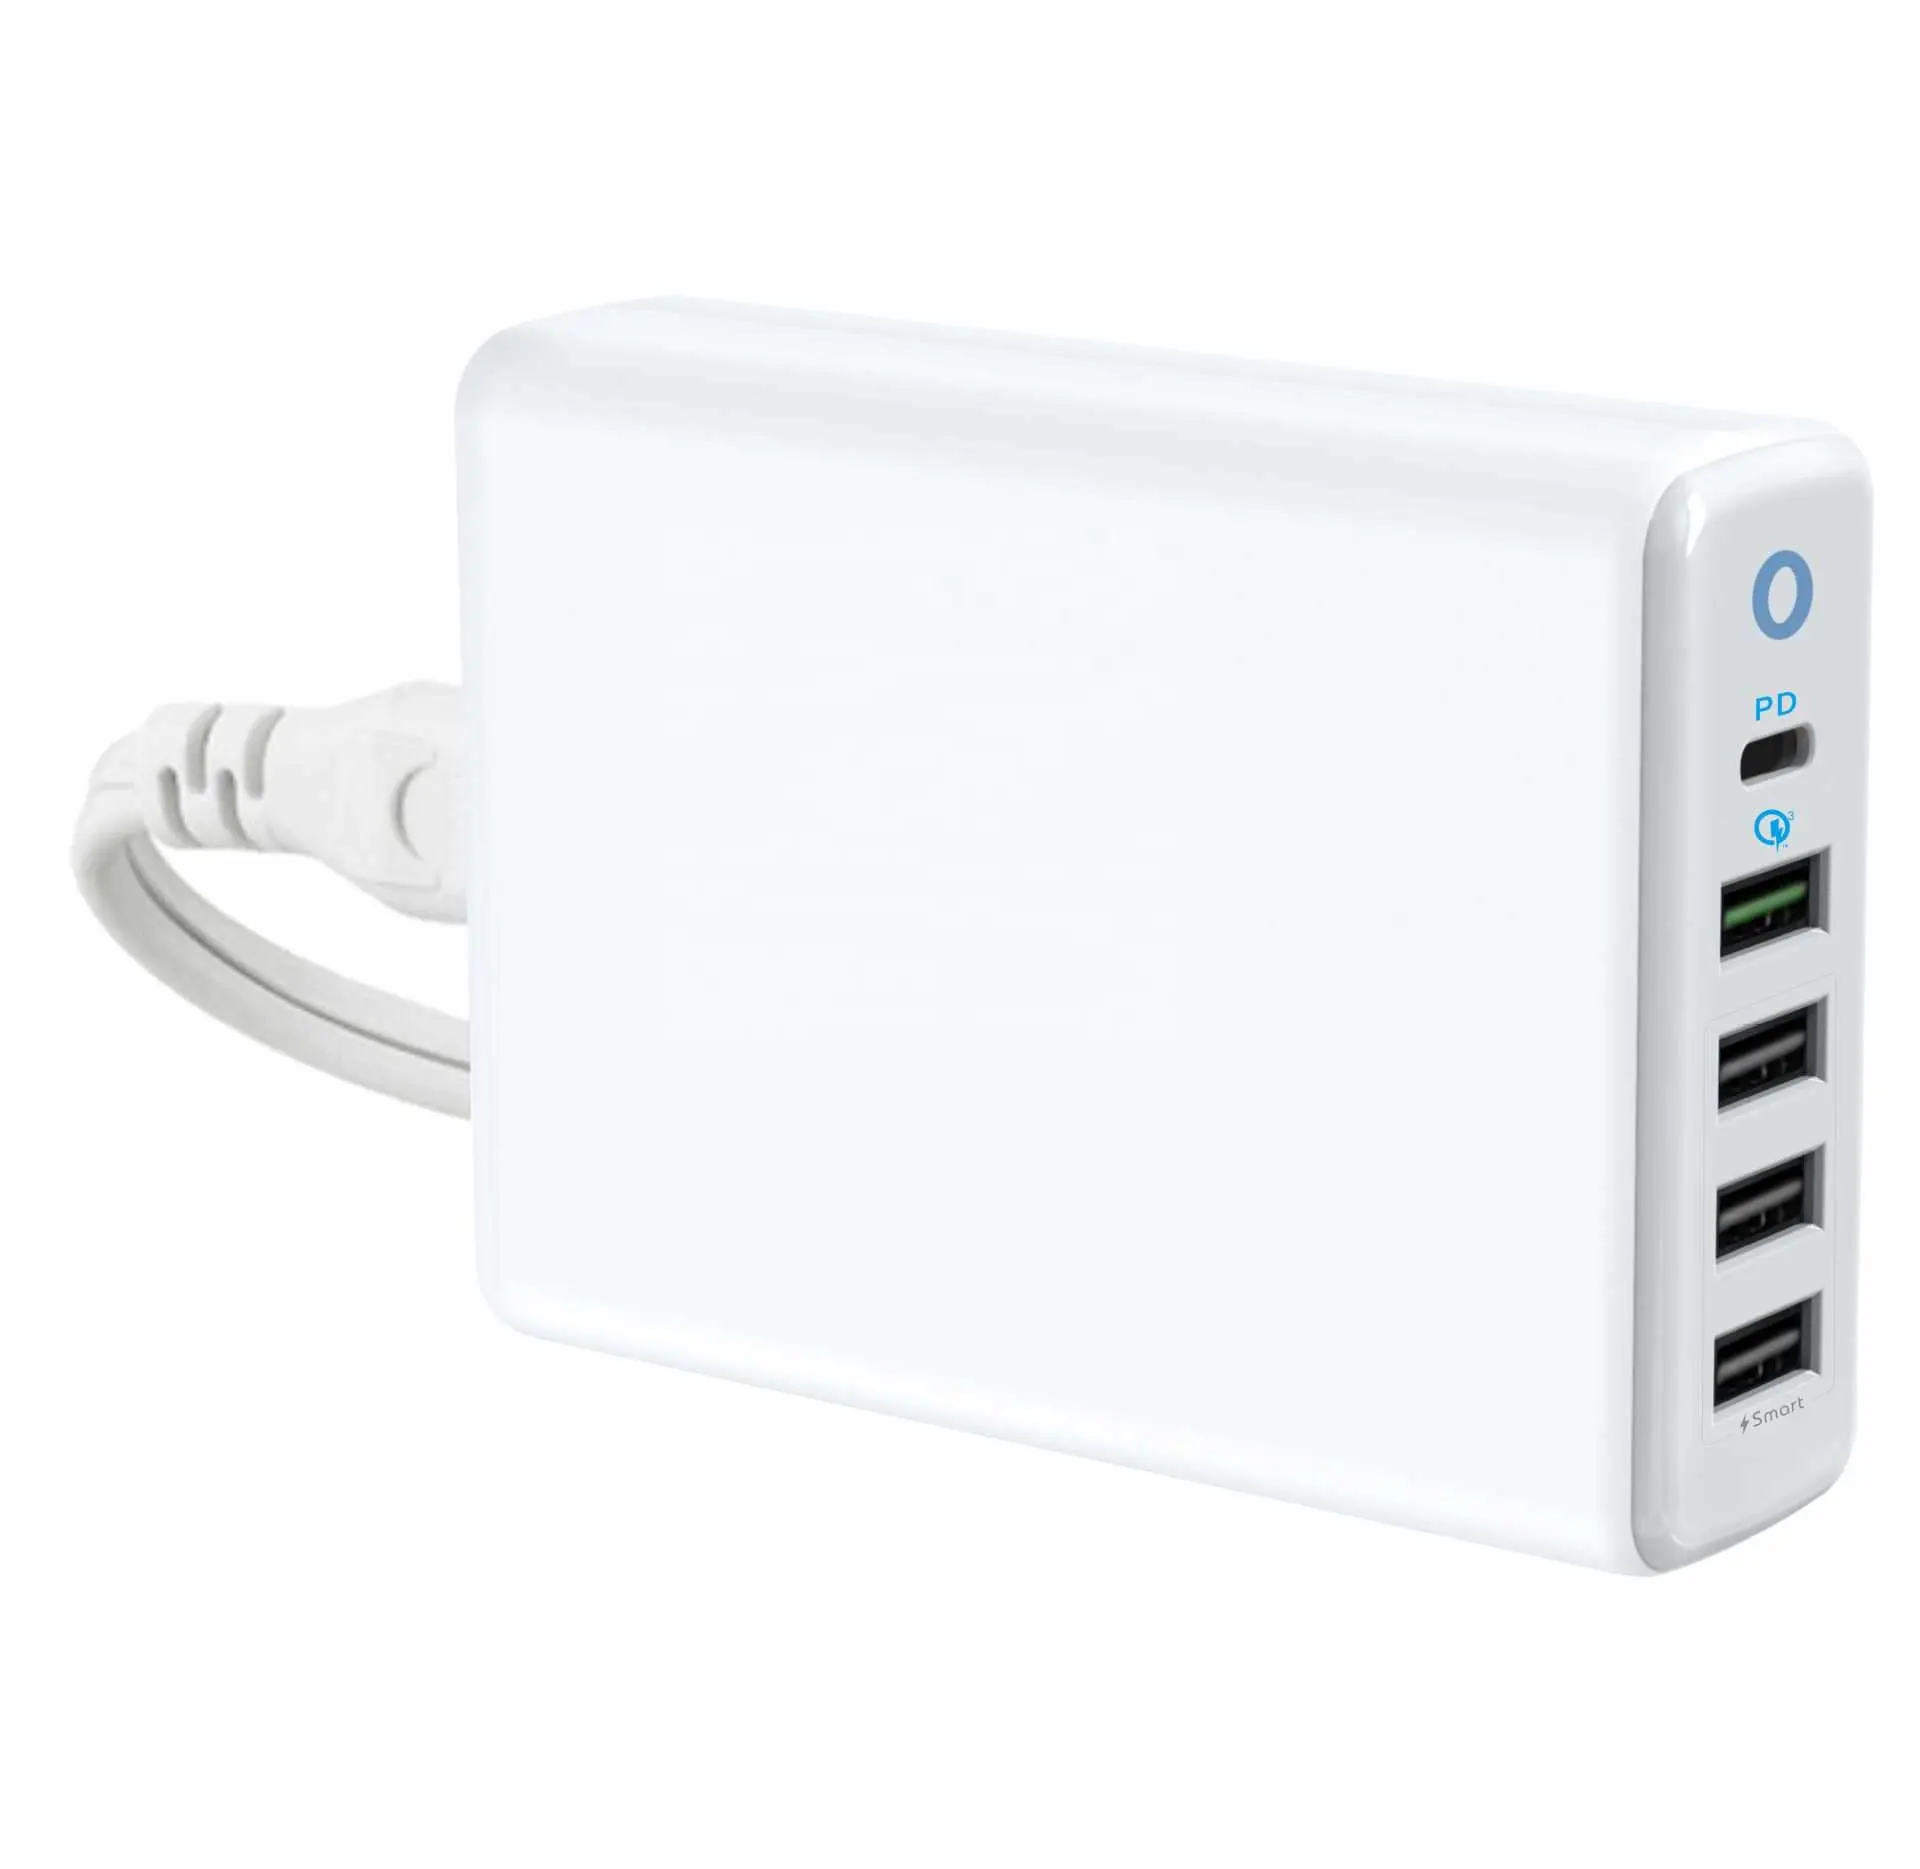 Trending products PD 20W 5 port USB Wall charger 60W 12A desktop charging station with multiport for iPhone iPad Galaxy Huawei